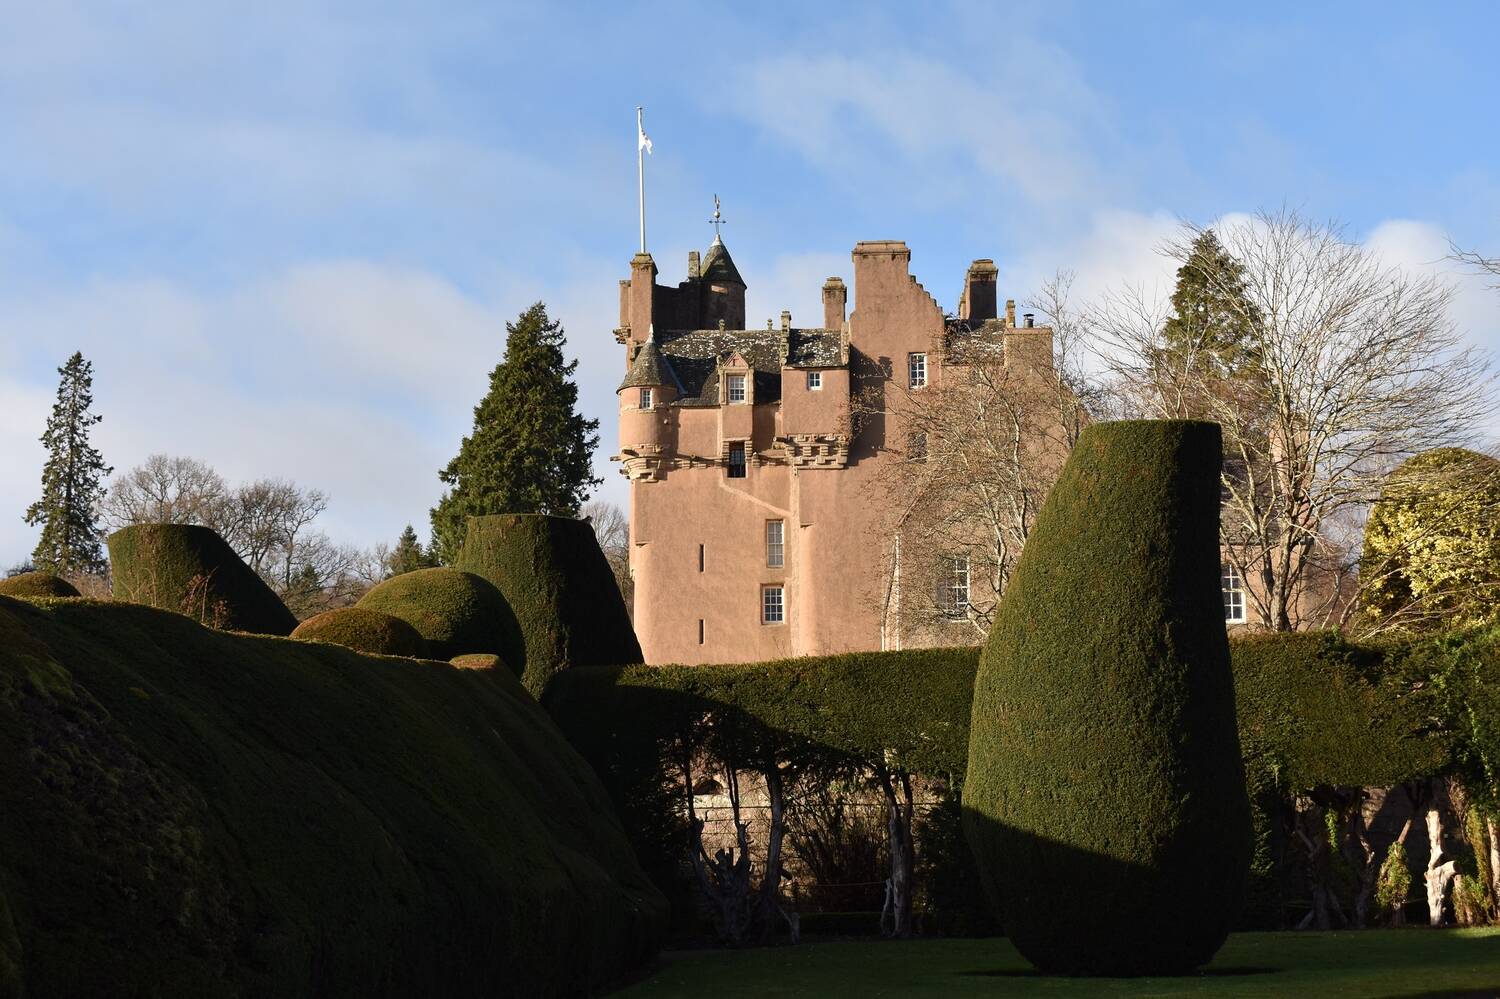 The pink walls of Crathes Castle rise behind the dark green yew hedges. In the foreground is a cylinder-shaped yew hedge. It is a bright winter's day with a pale blue sky.